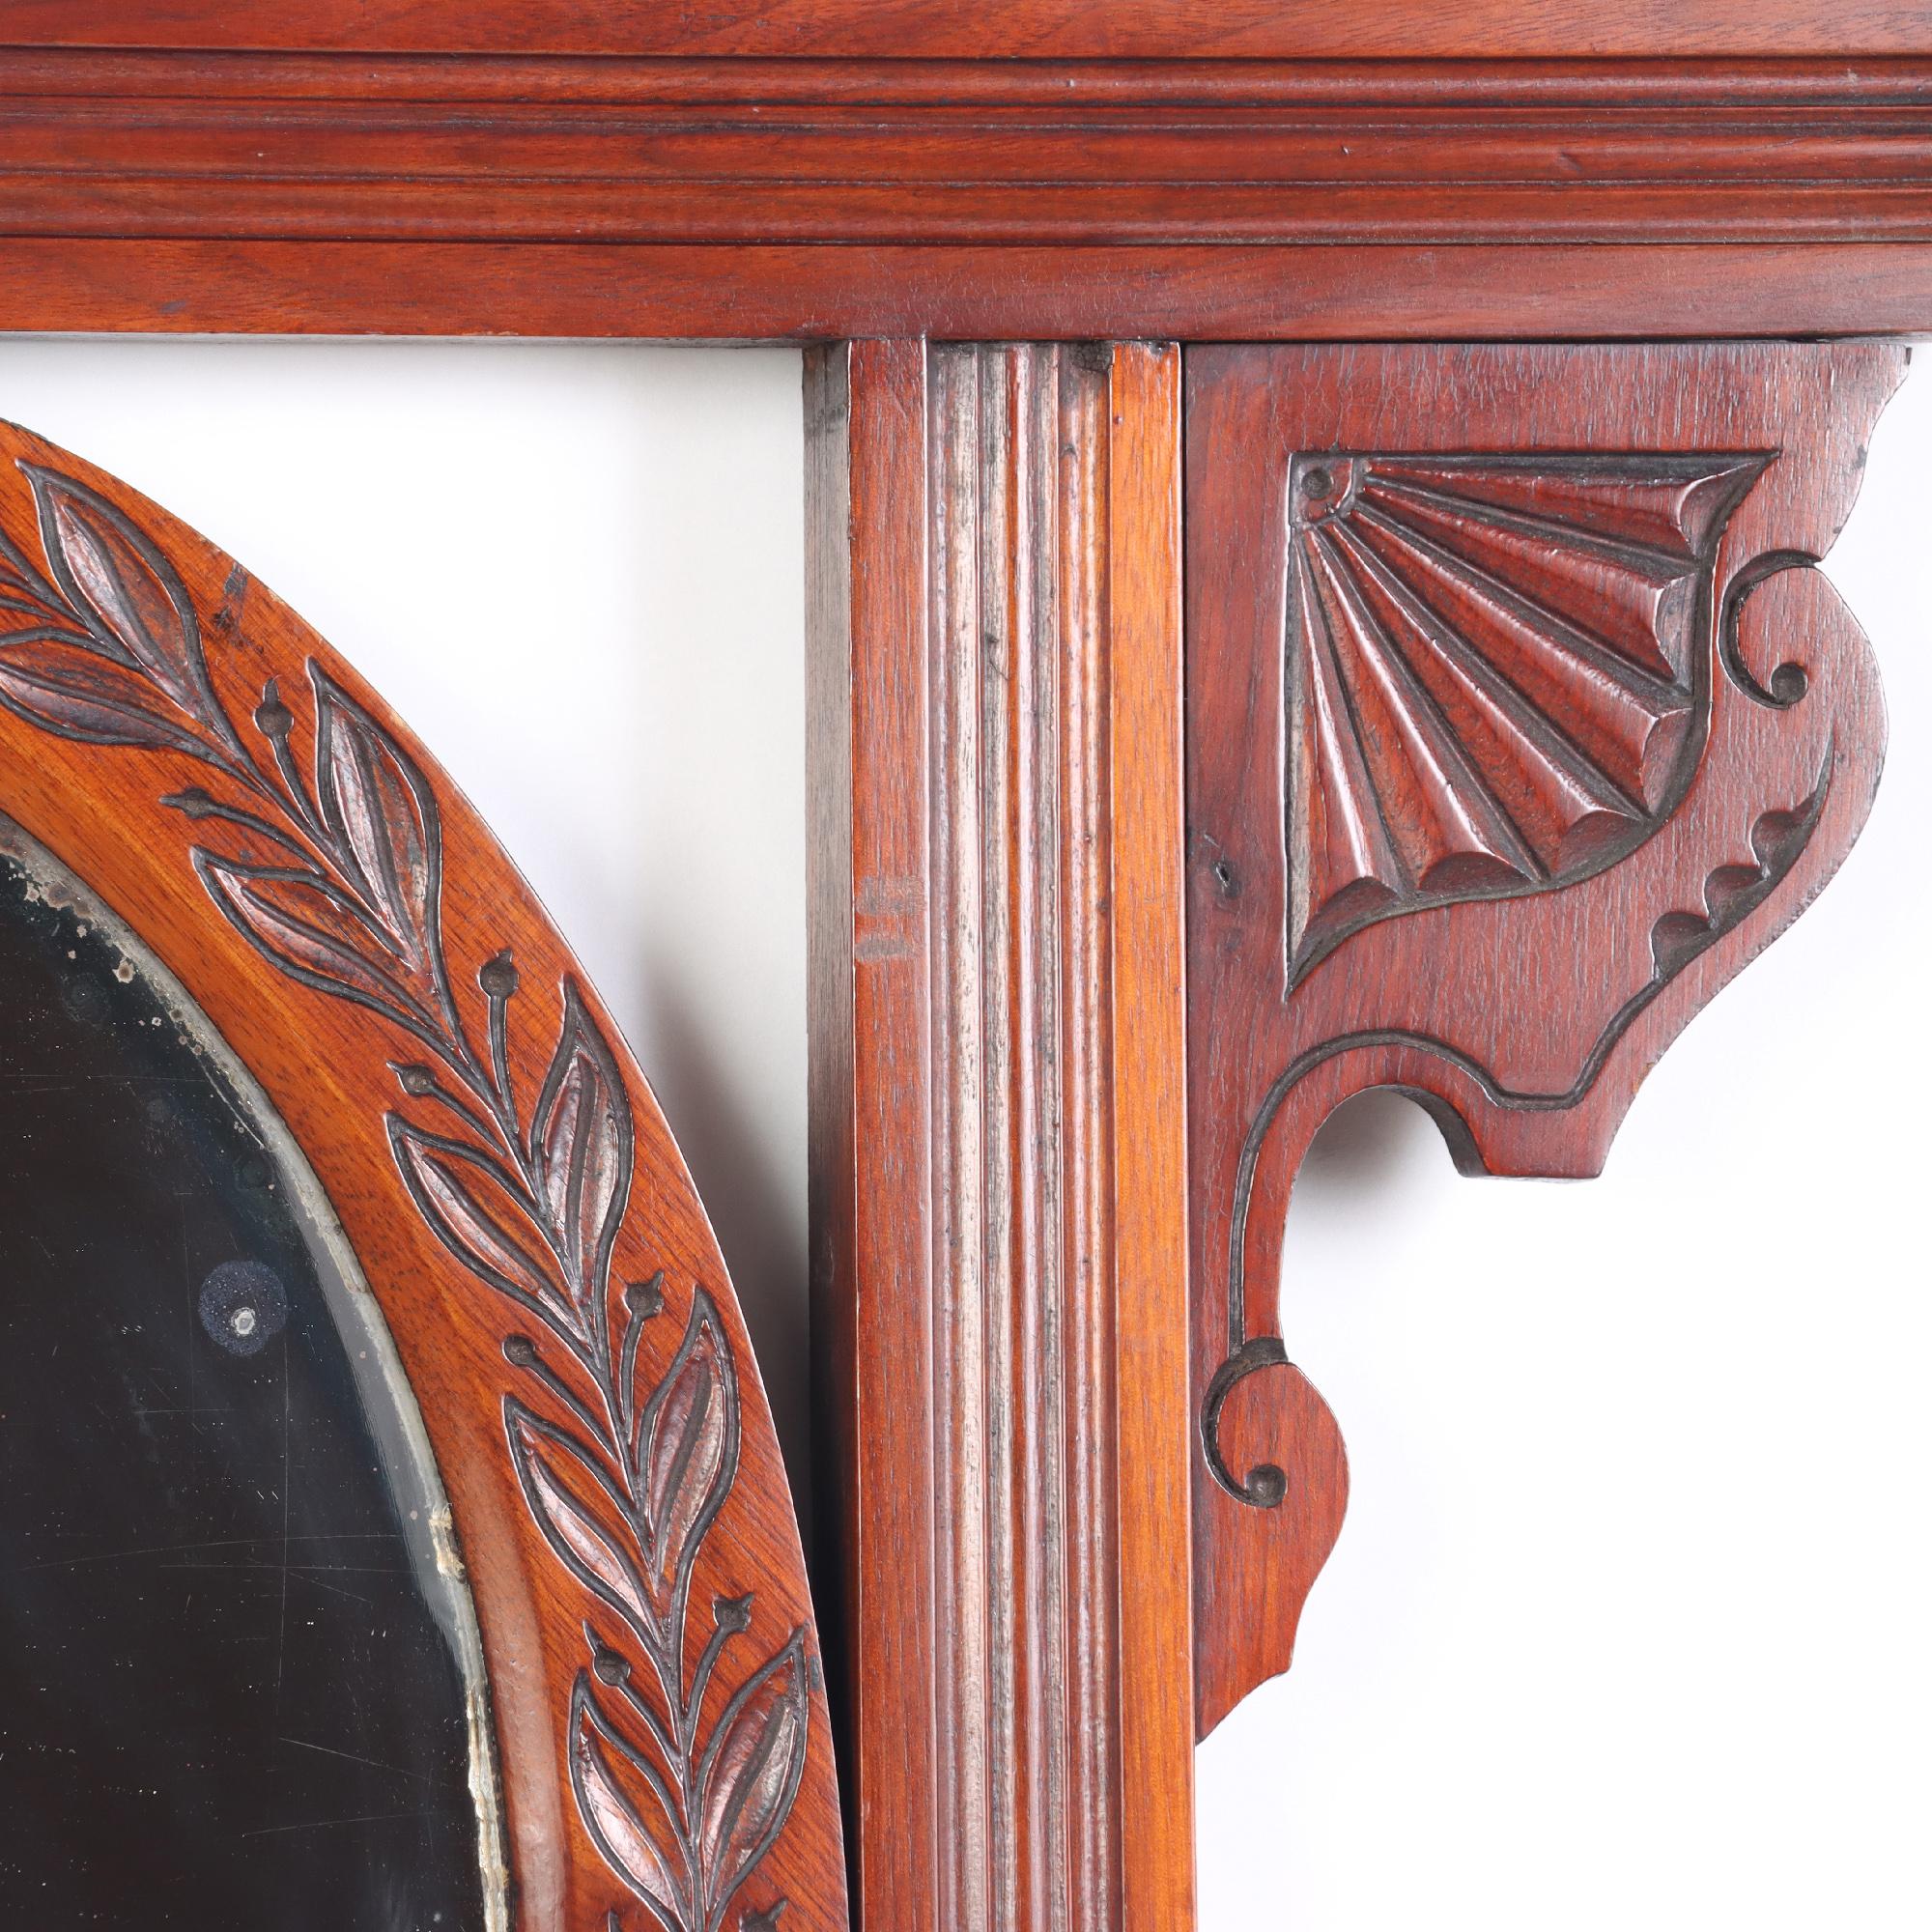 European Victorian Carved Mahogany Wall Mirror with Shaped Beveled Mirror circa 1880 For Sale